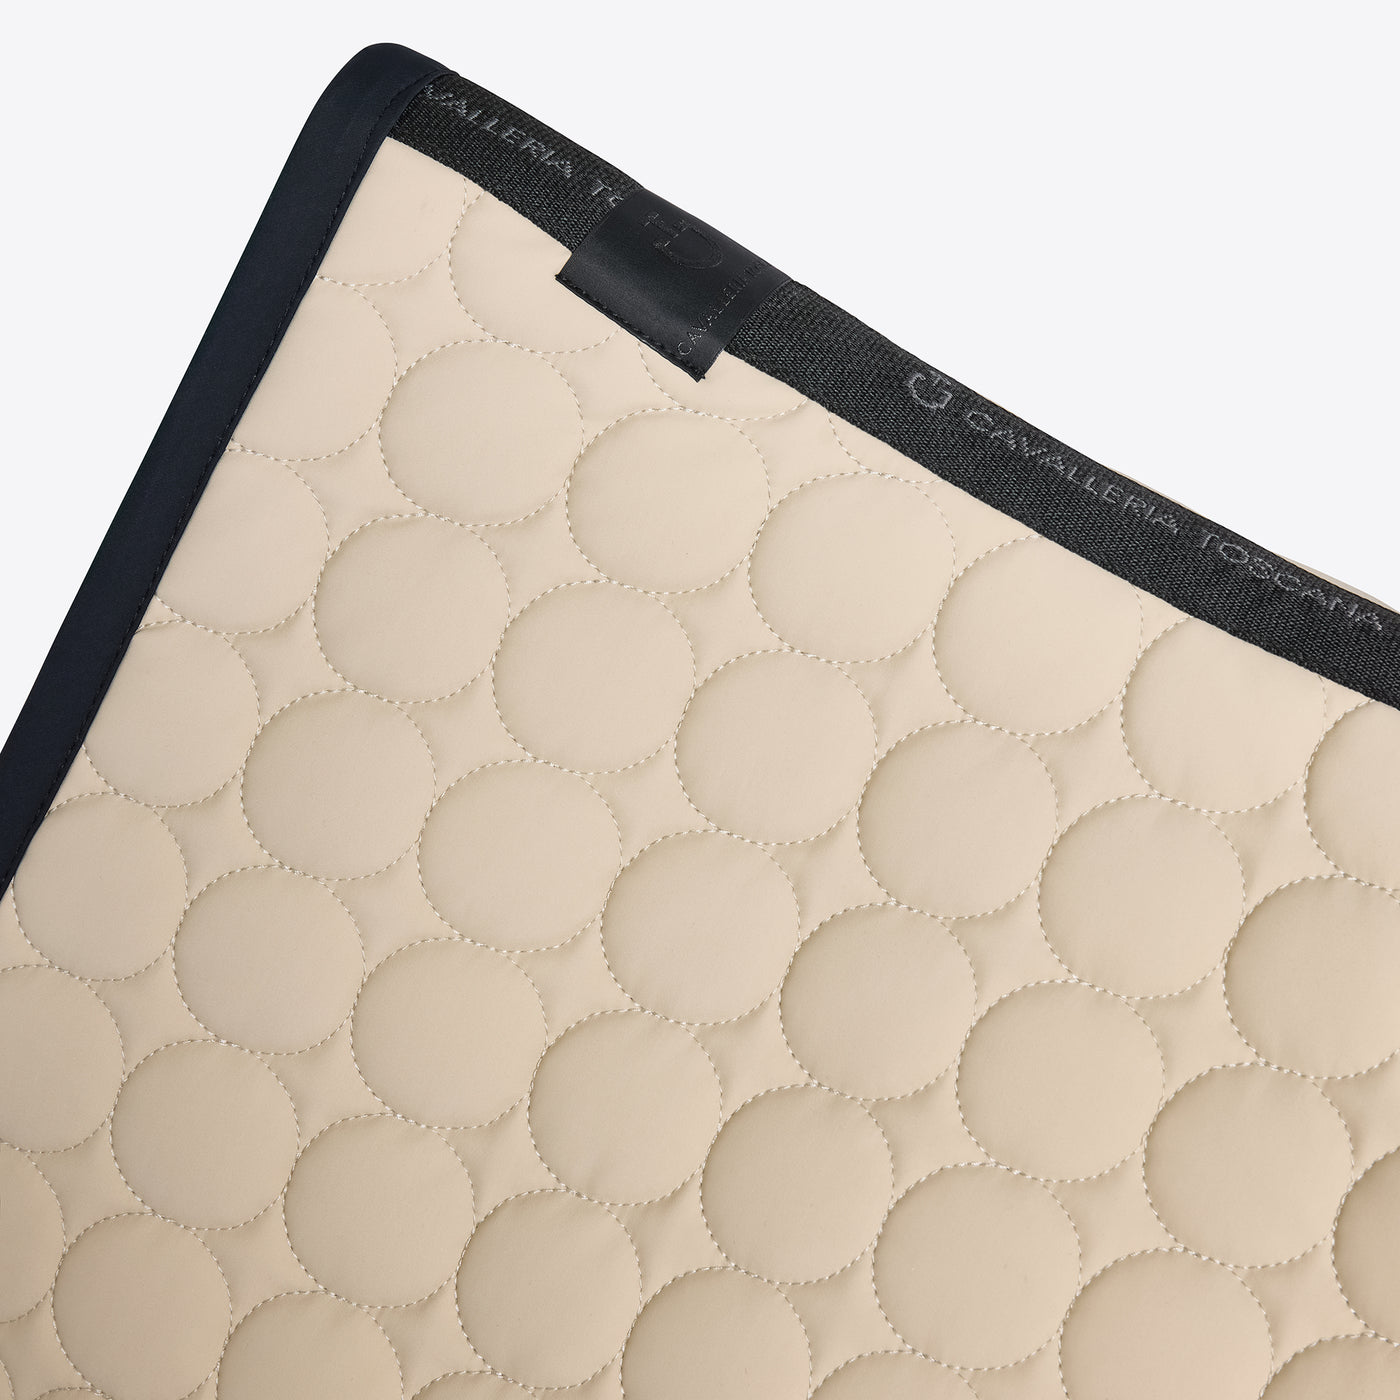 CT Circle Quilted Dressage Saddle pad